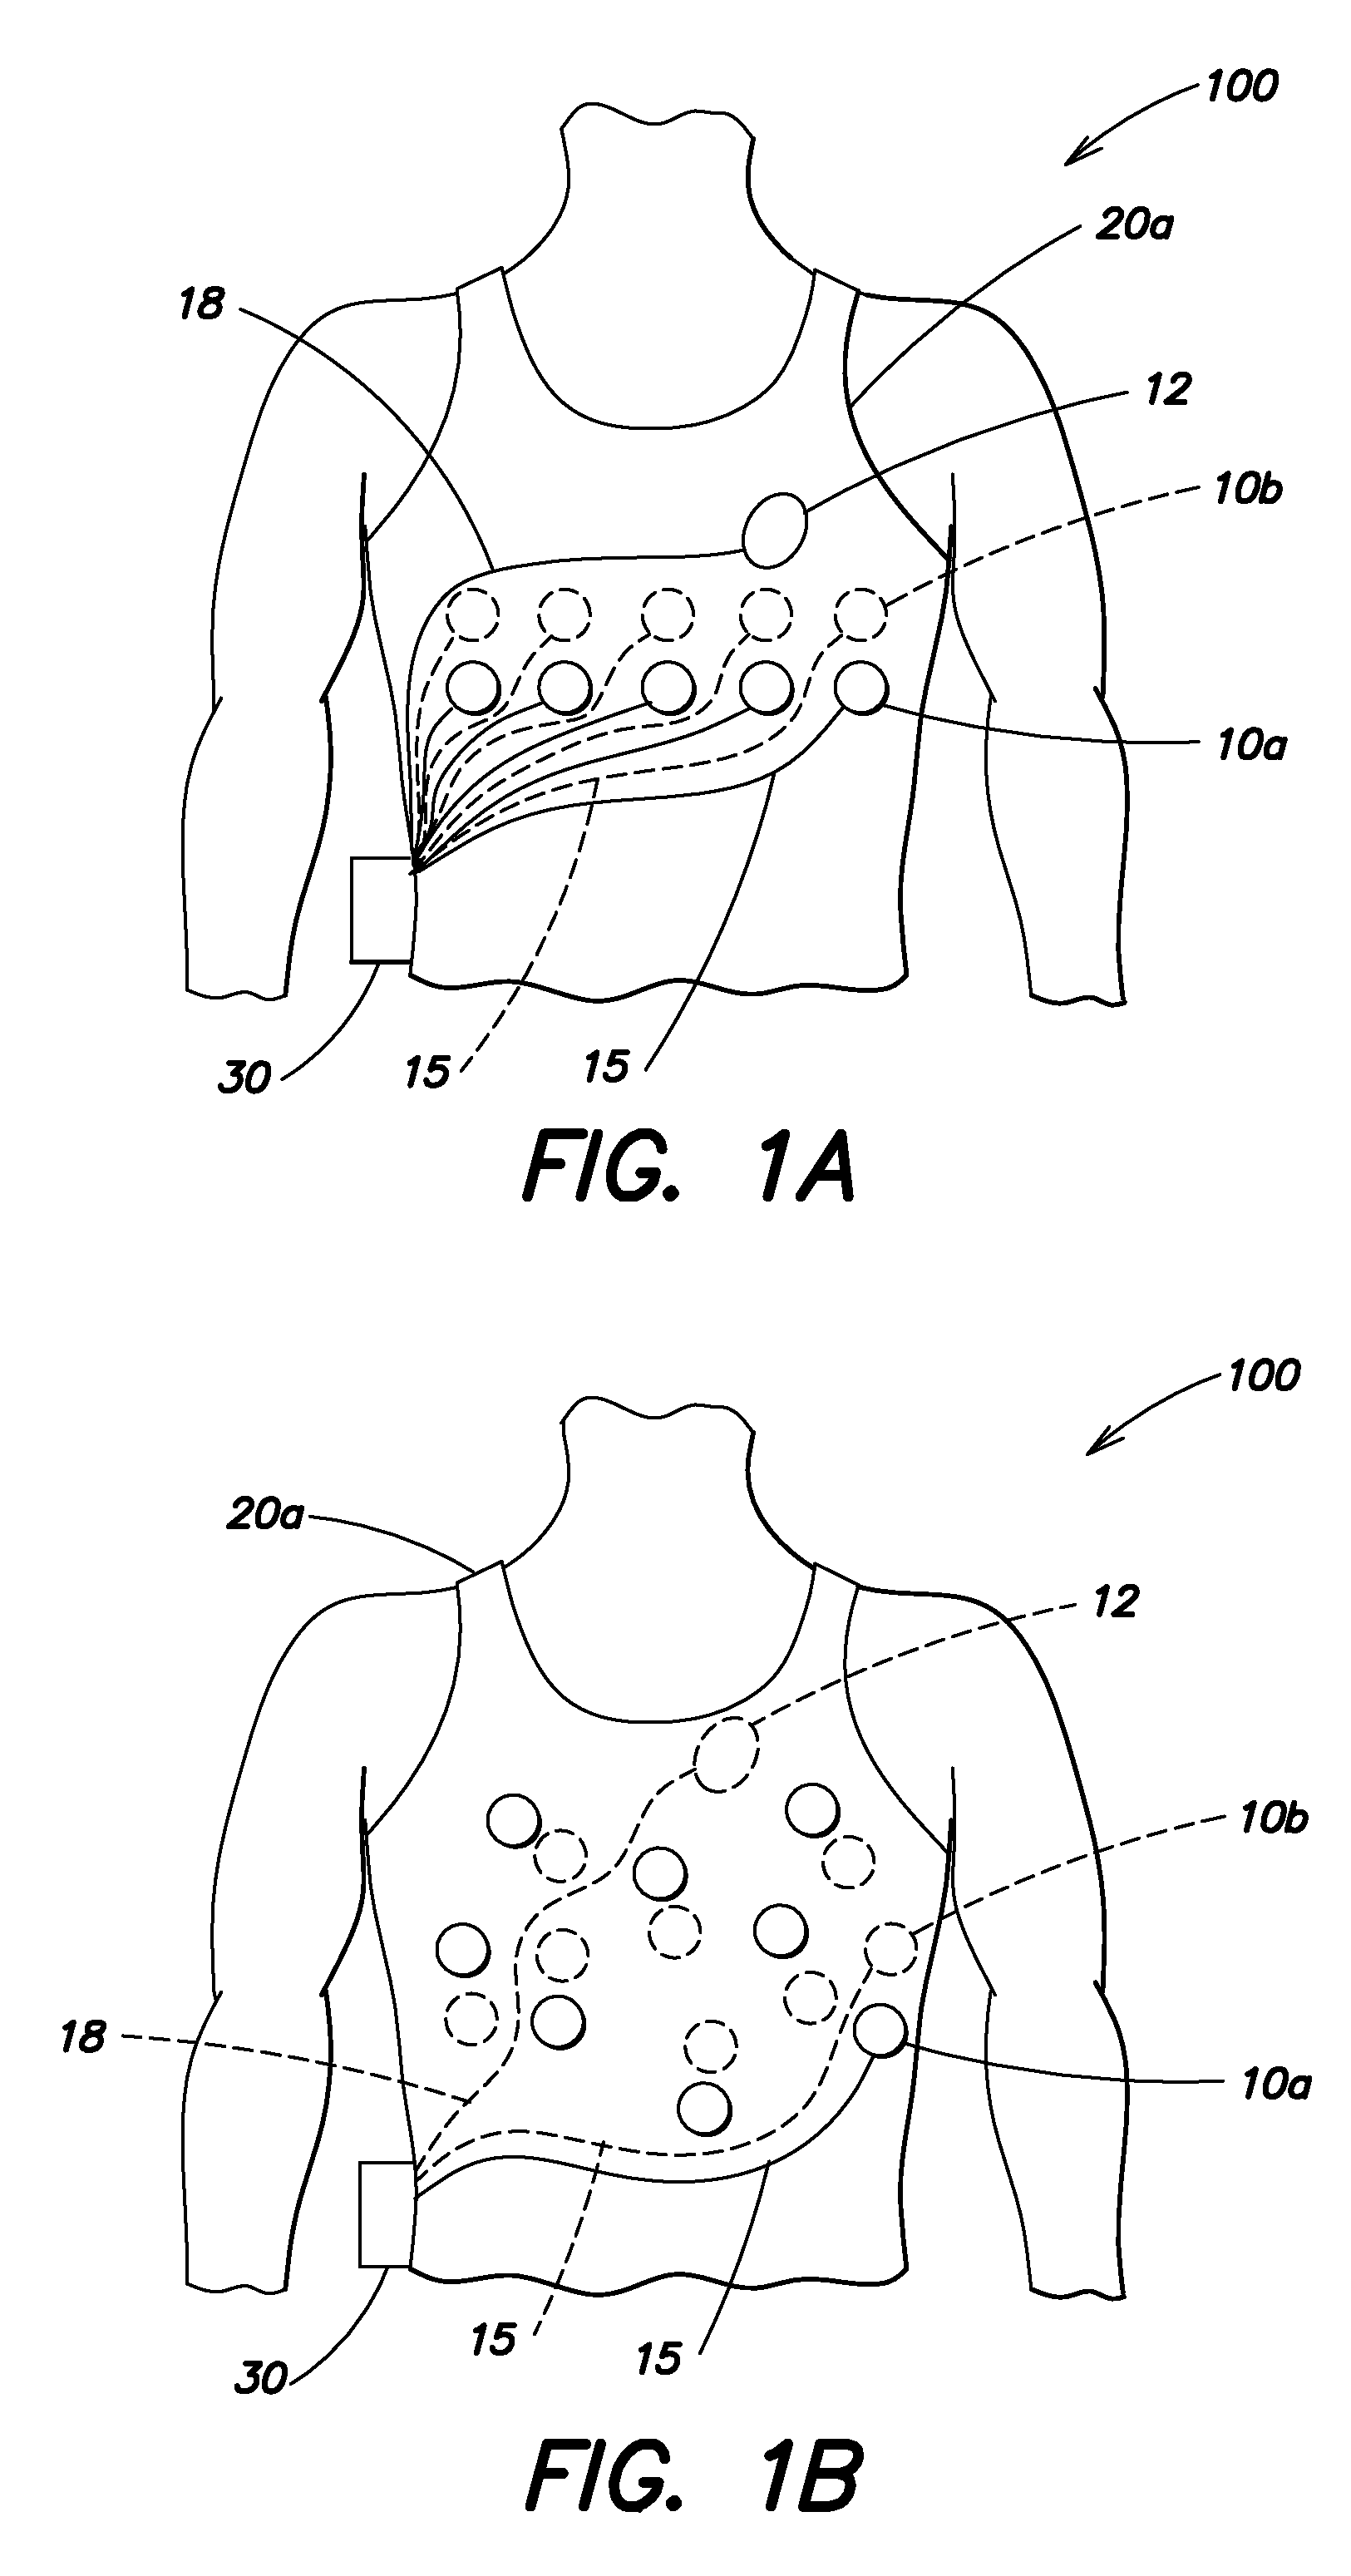 Wearable ambulatory medical device with multiple sensing electrodes